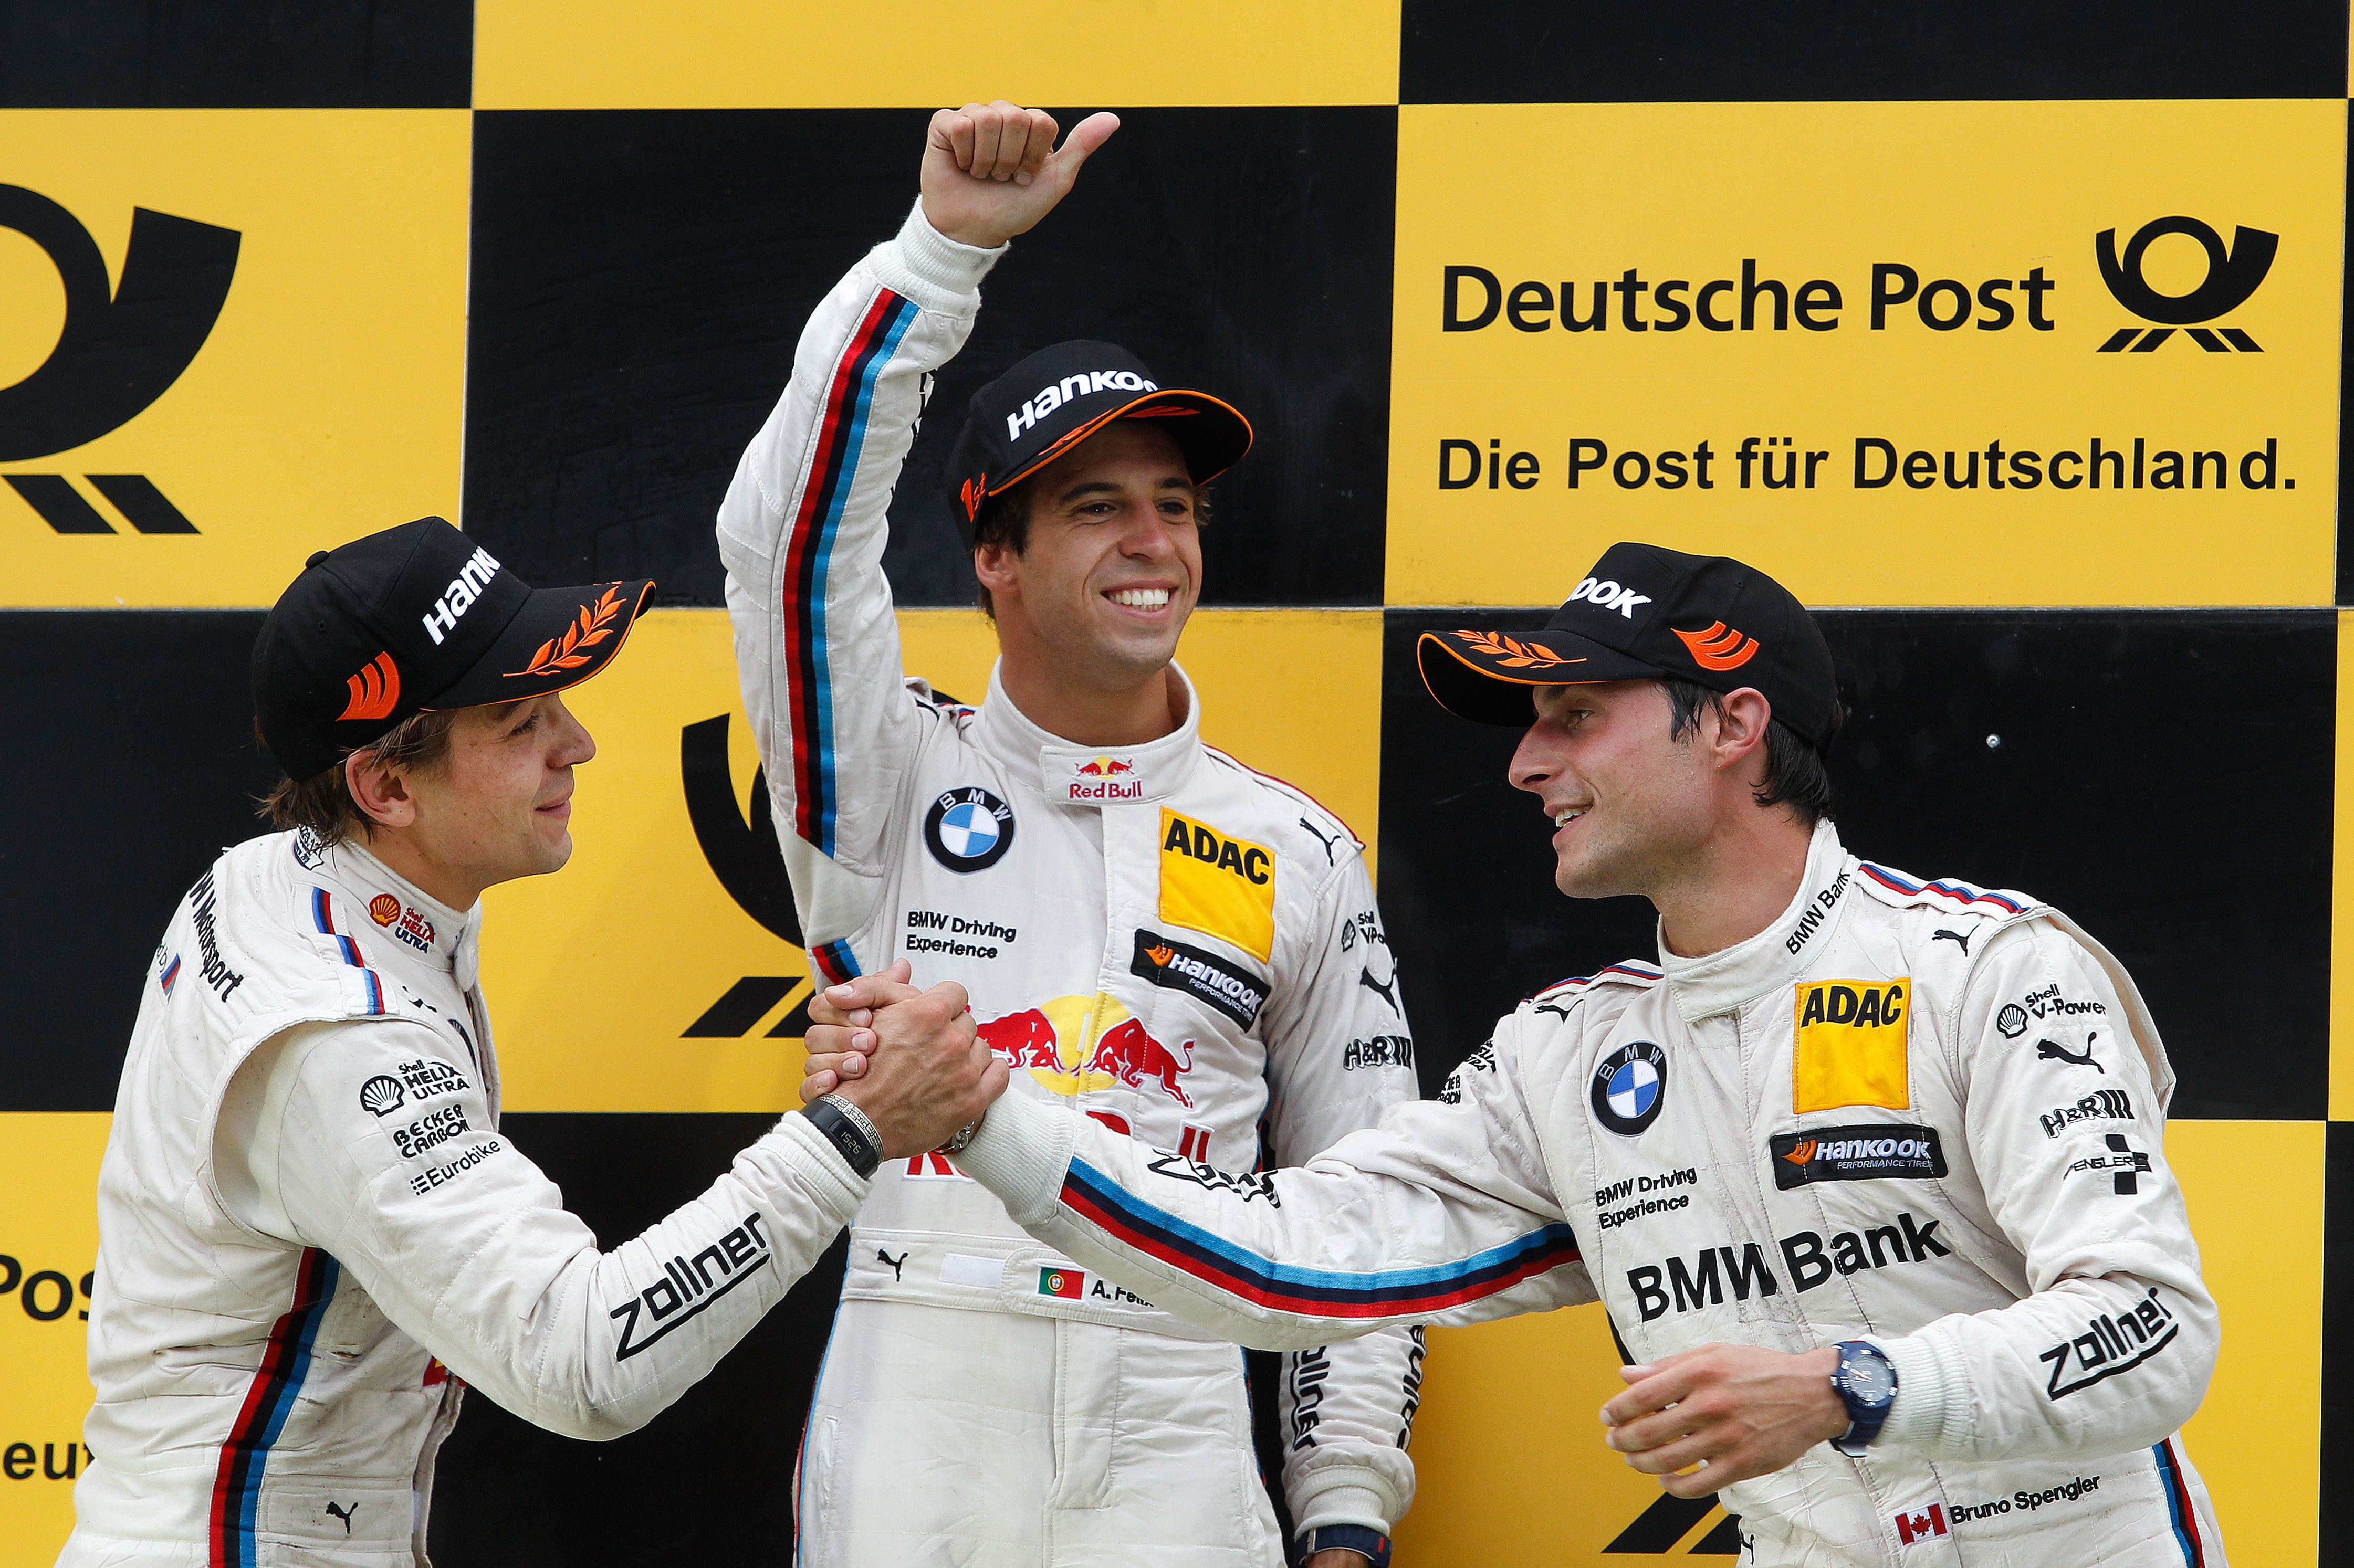 Zandvoort (NL) 12th July 2015. BMW Motorsport, Race 08, 2nd Place Driver Augusto Farfus (BR), Winner Antonio Felix da Costa (PT) and 3rd Place Driver Bruno Spengler (CA). This image is copyright free for editorial use © BMW AG (07/2015).